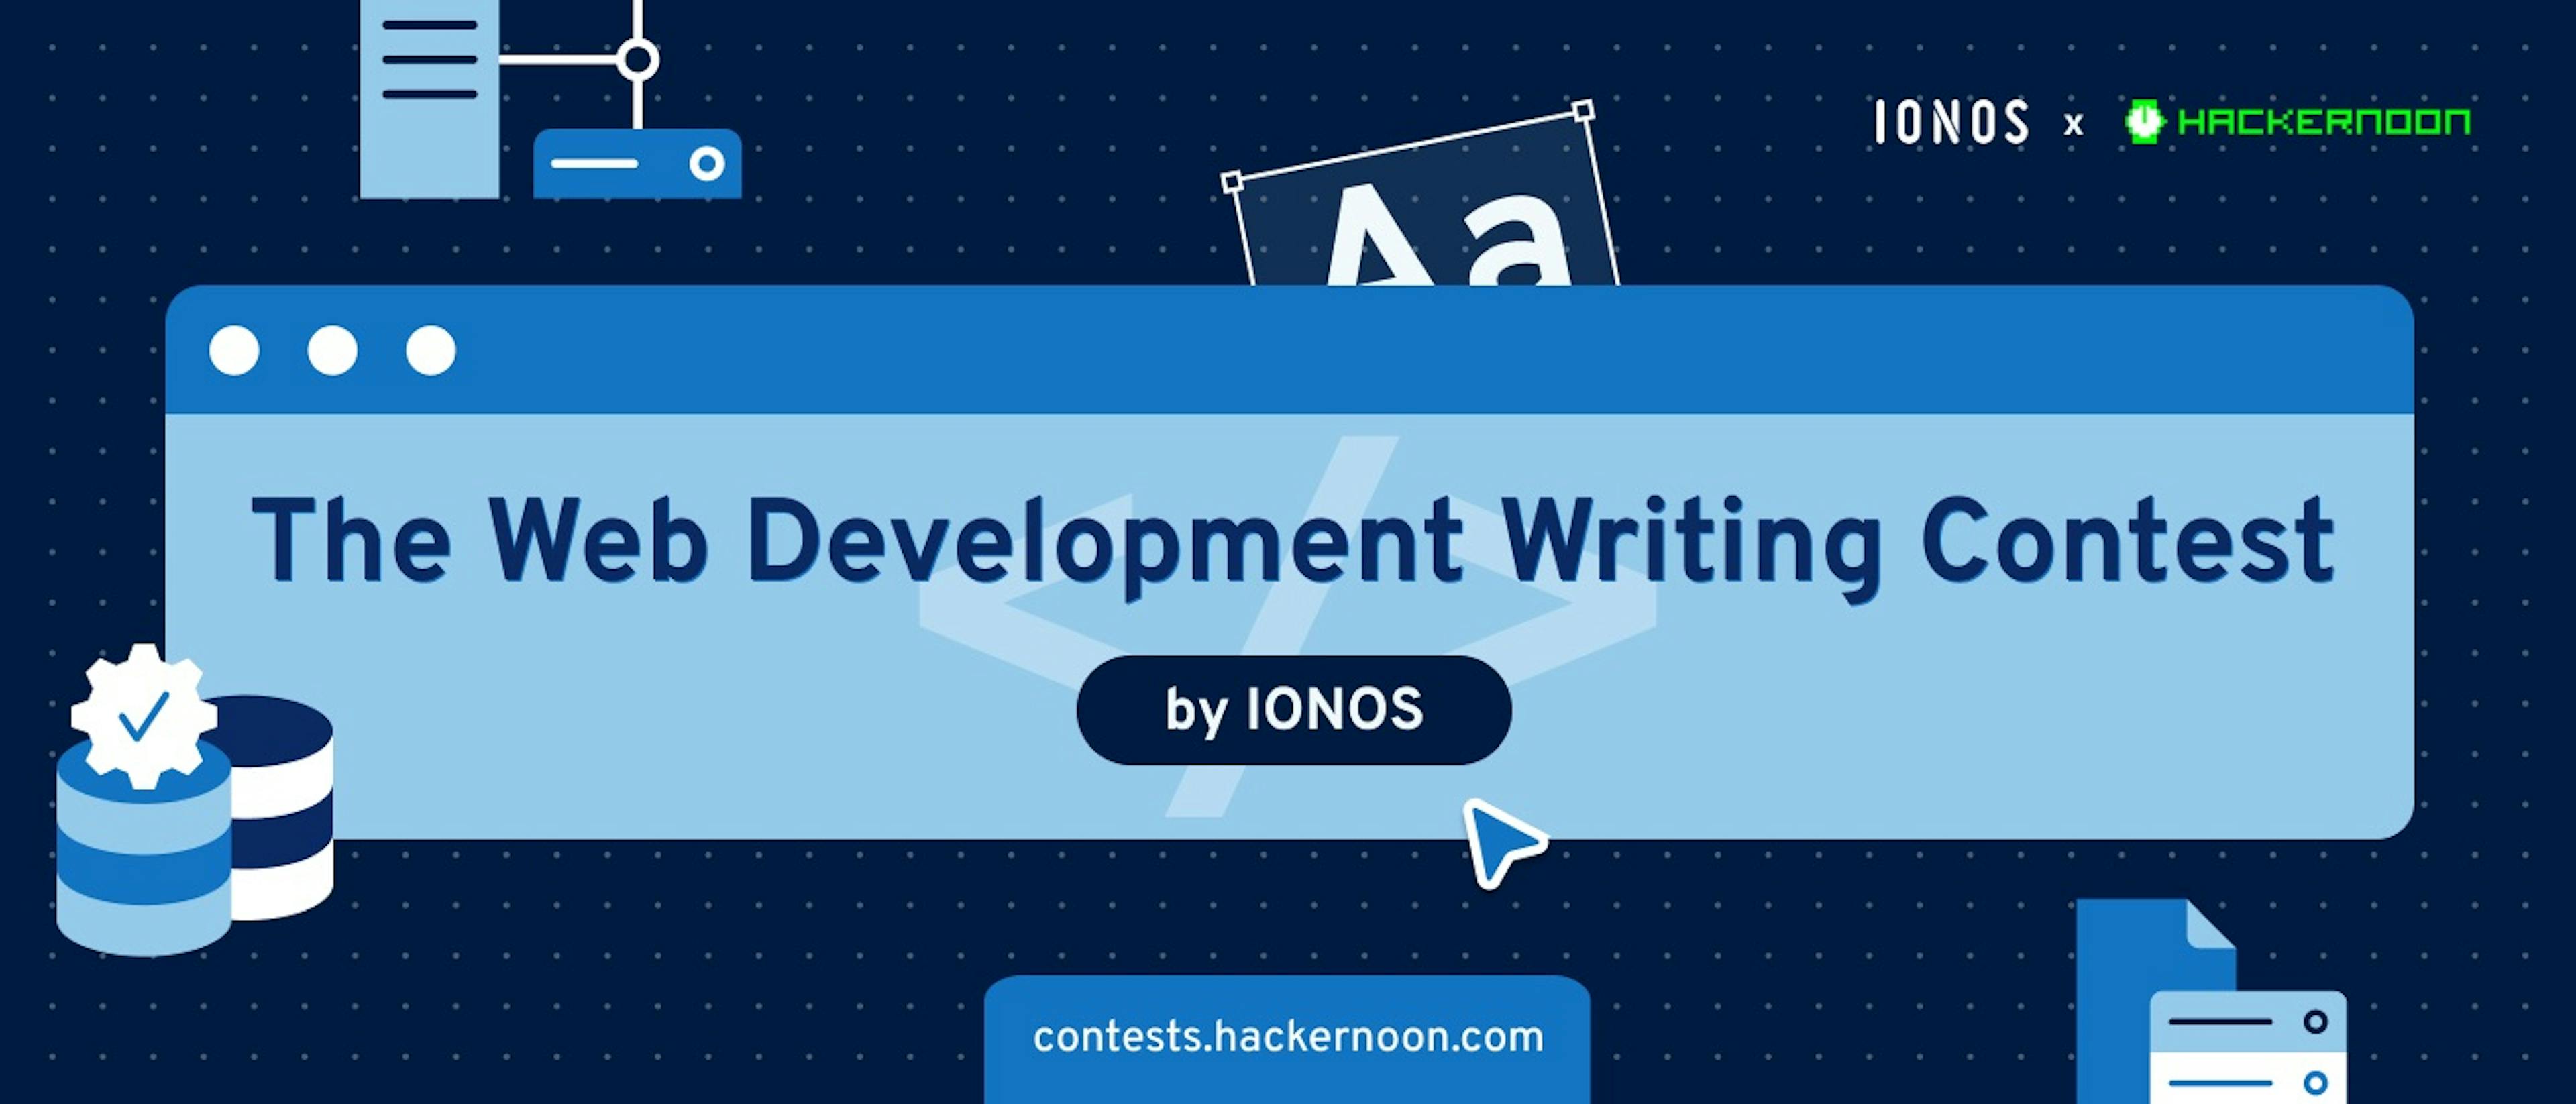 featured image - The Web Development Writing Contest by IONOS